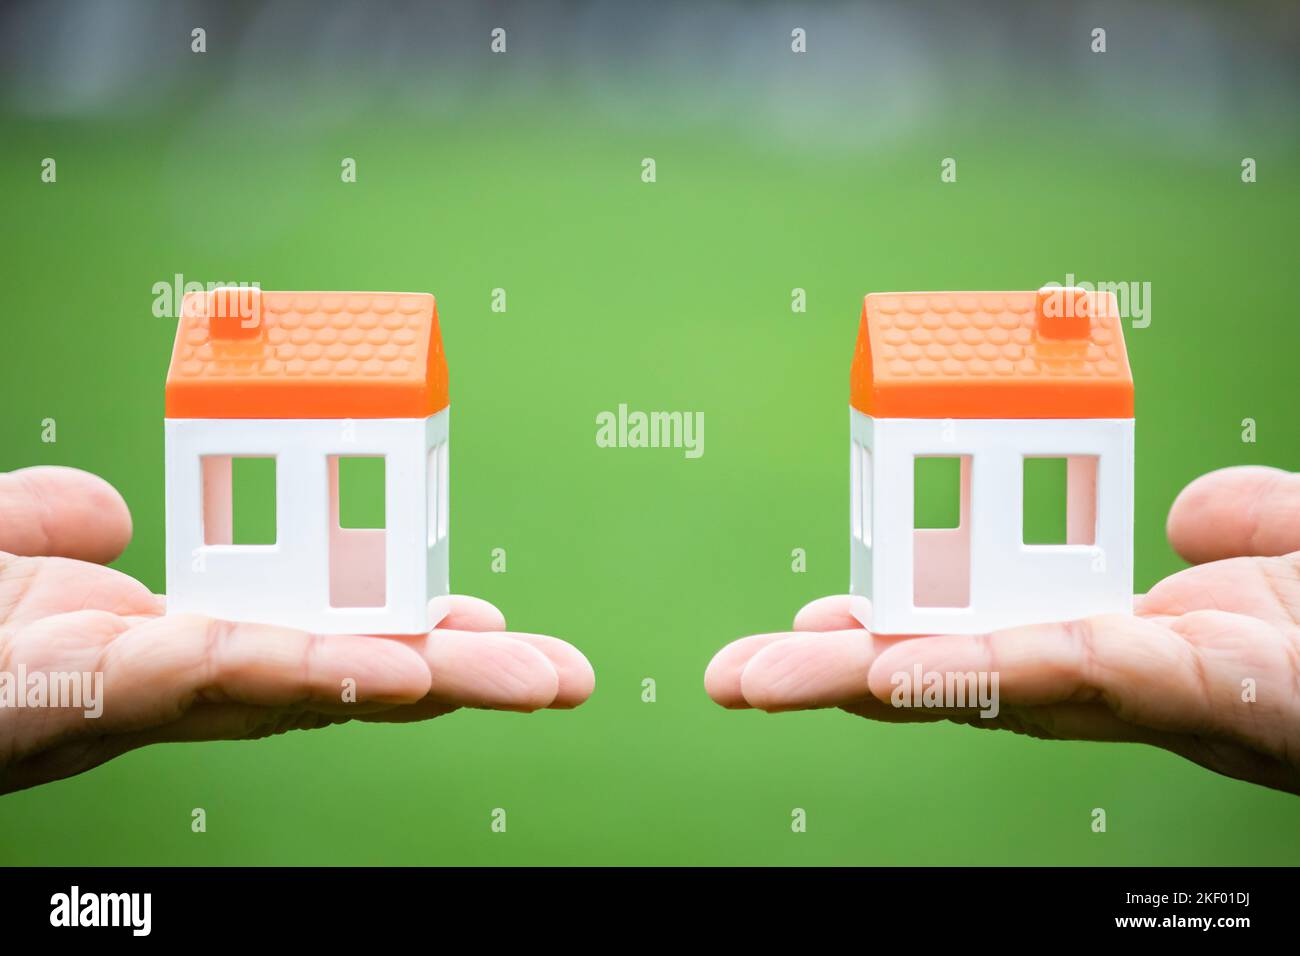 New home, right and left hand holding mutual house model isolated on green background. Real estate idea concept photo. For sale or rent. Investment. Stock Photo